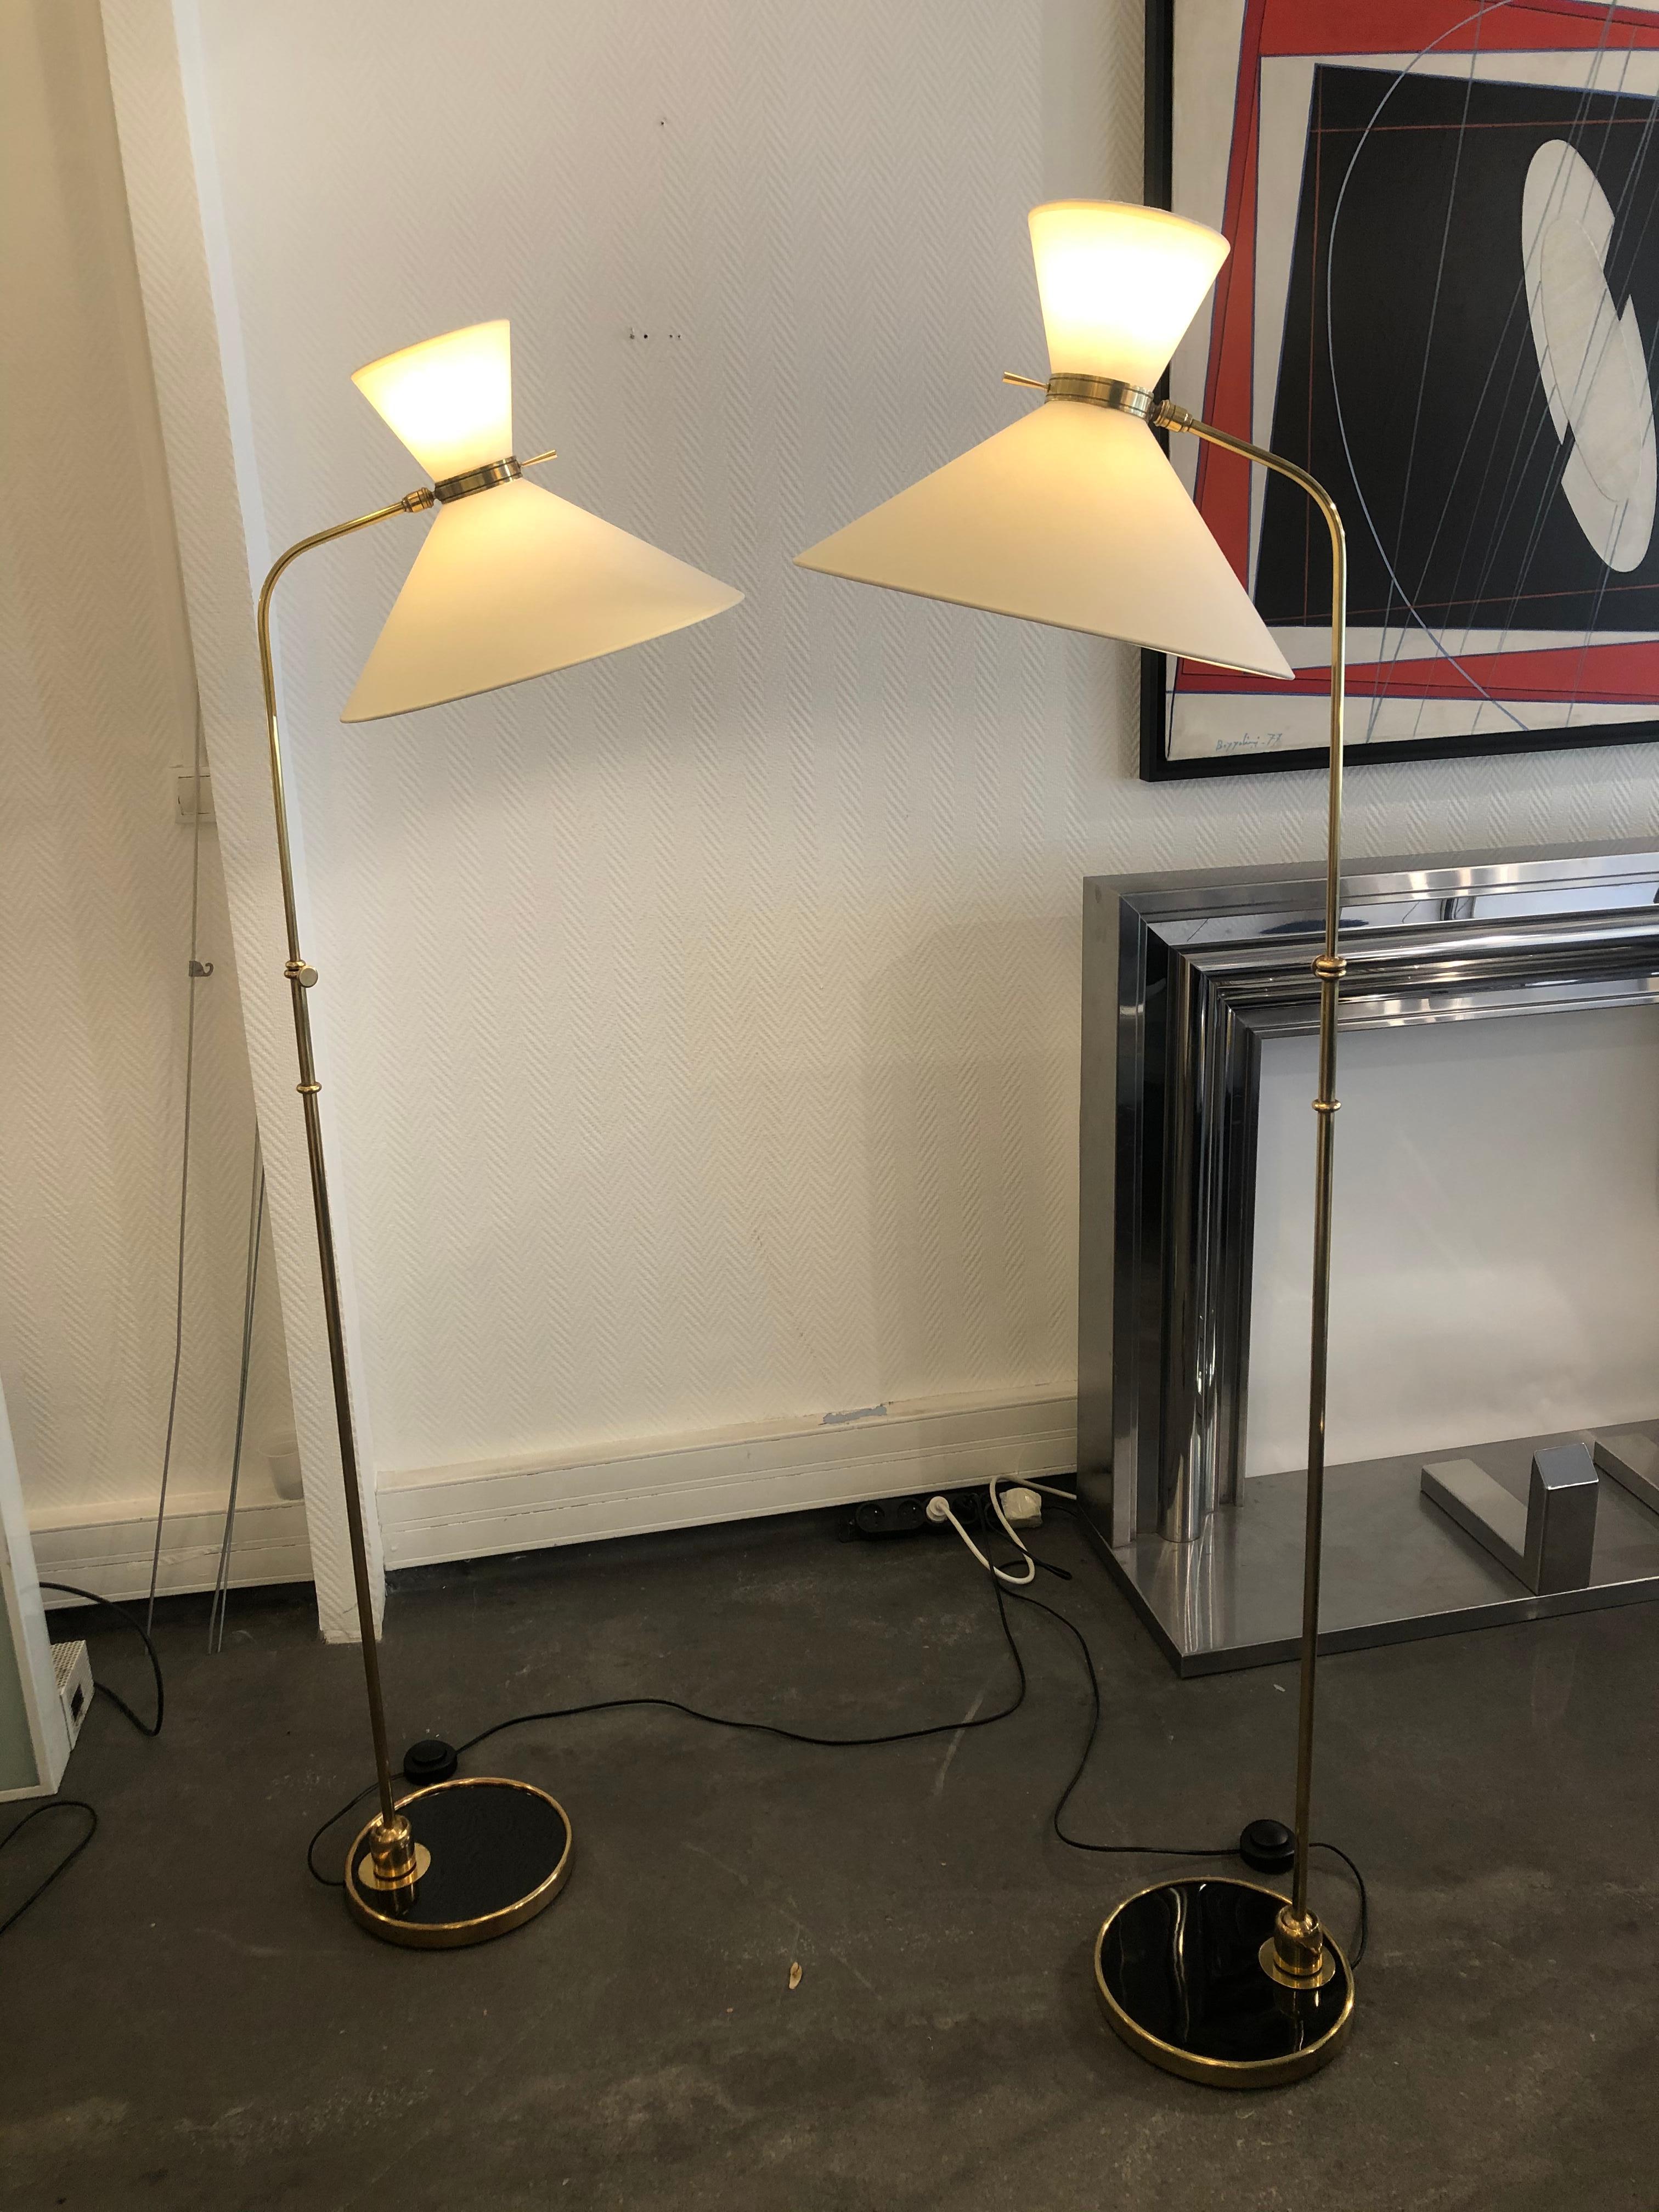 Pair of adjustable floor lamp by Maison Lunel 
from 1950
brass and black lacquered base
several possible positions thanks to these two ball joints.